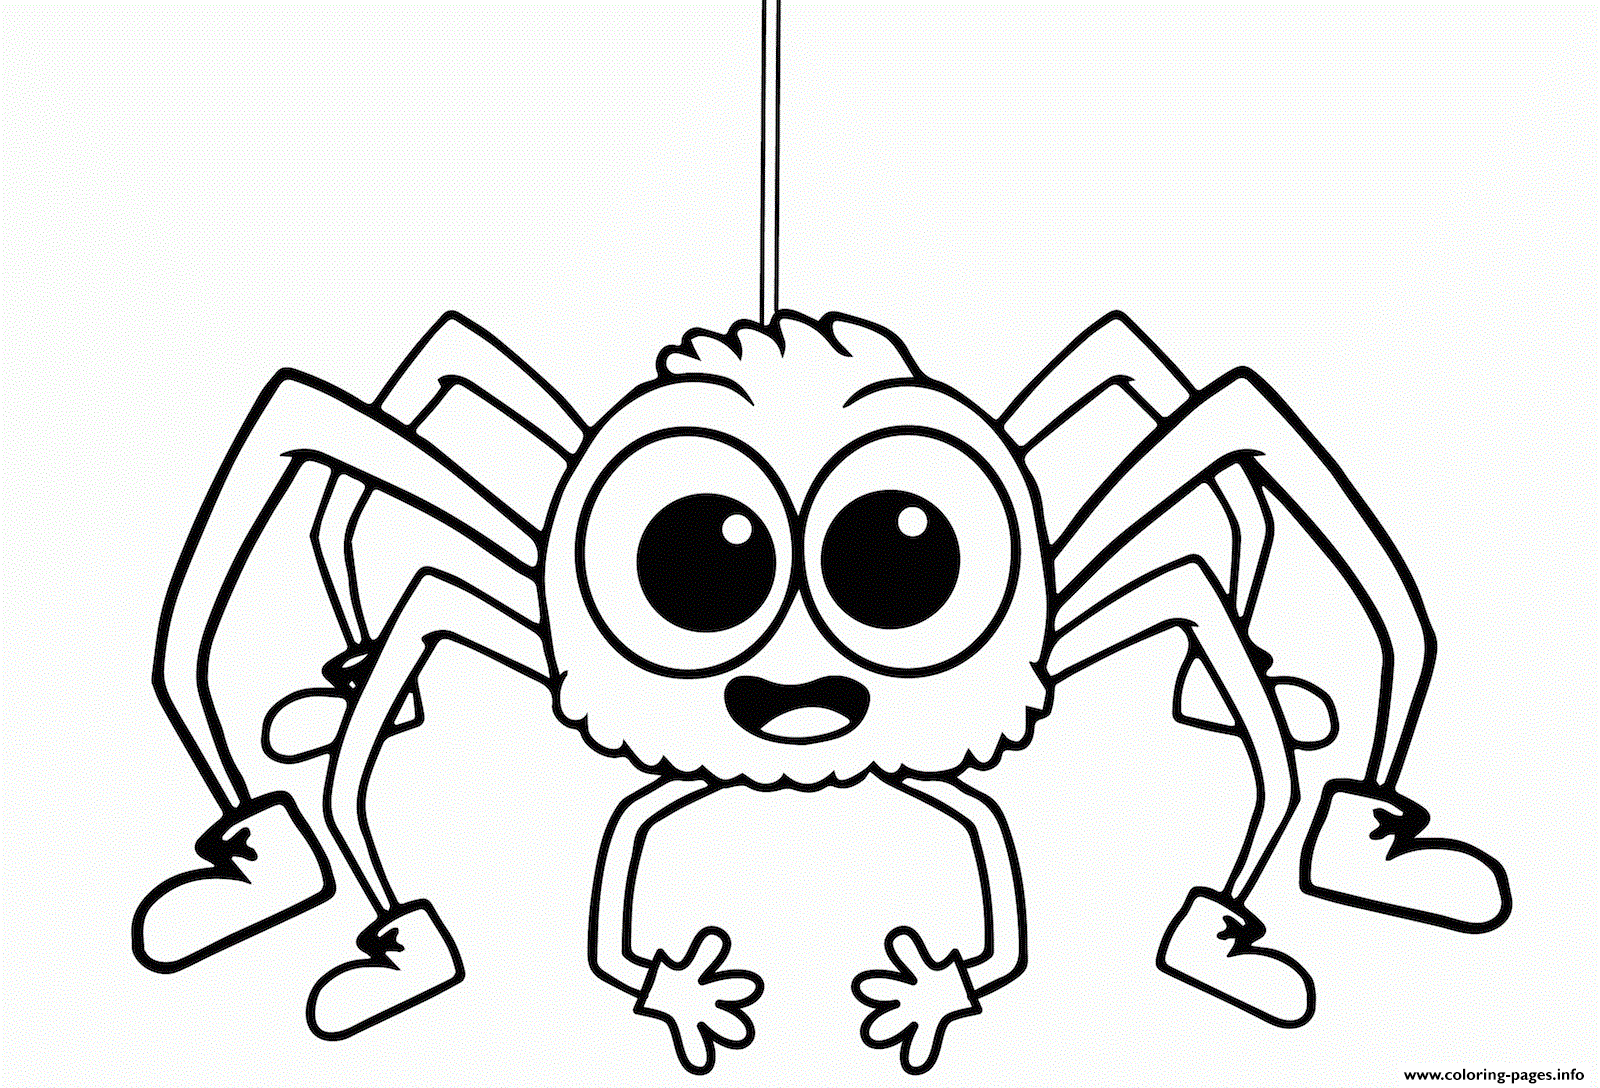 Adorable Spider coloring